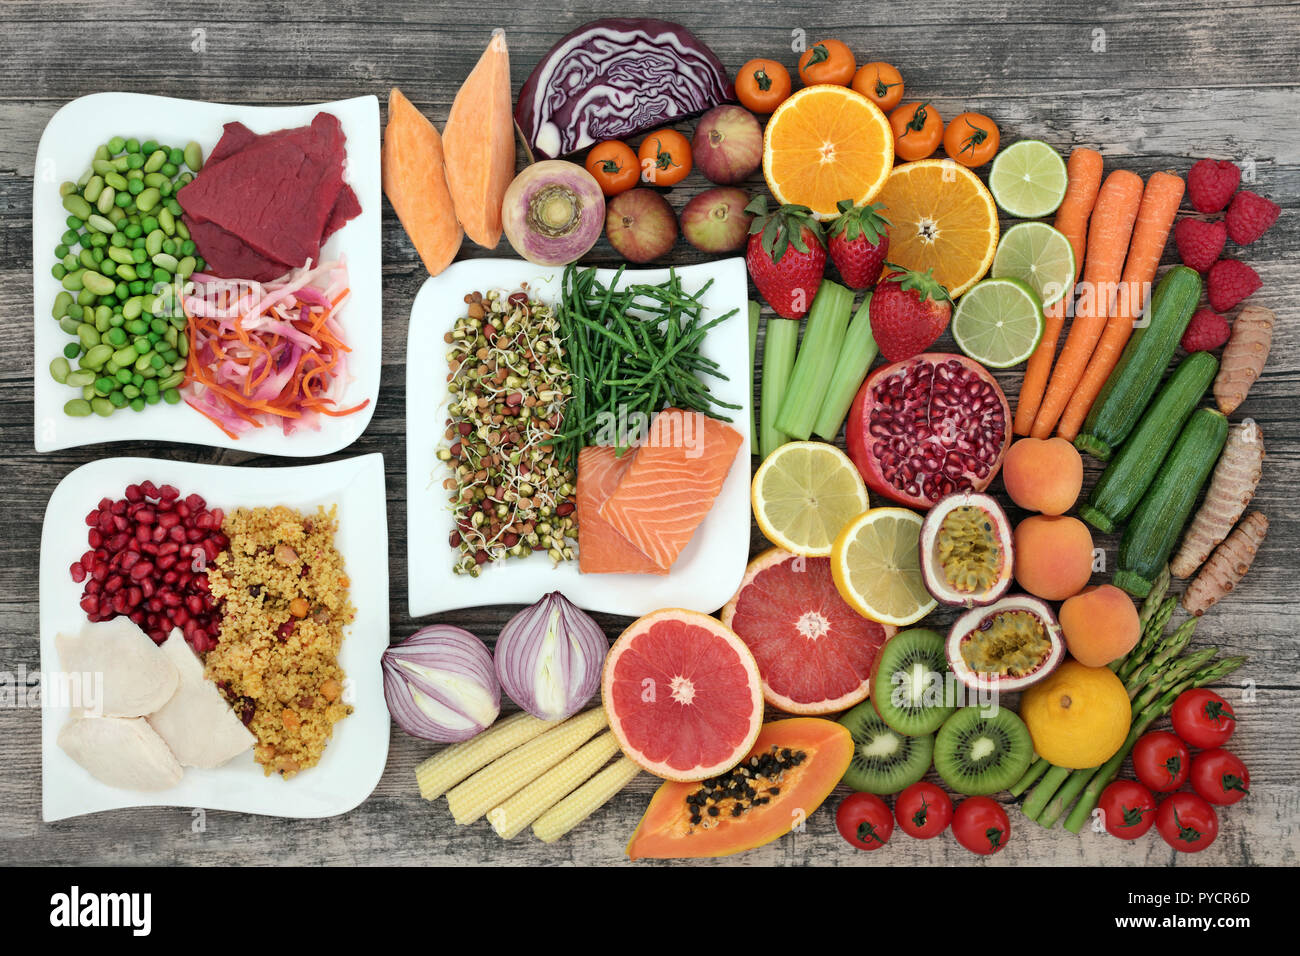 Diet health food concept with a large variety of vegetables, fruit, meat, fish, grain salad and spice with foods high in protein & antioxidants, Stock Photo